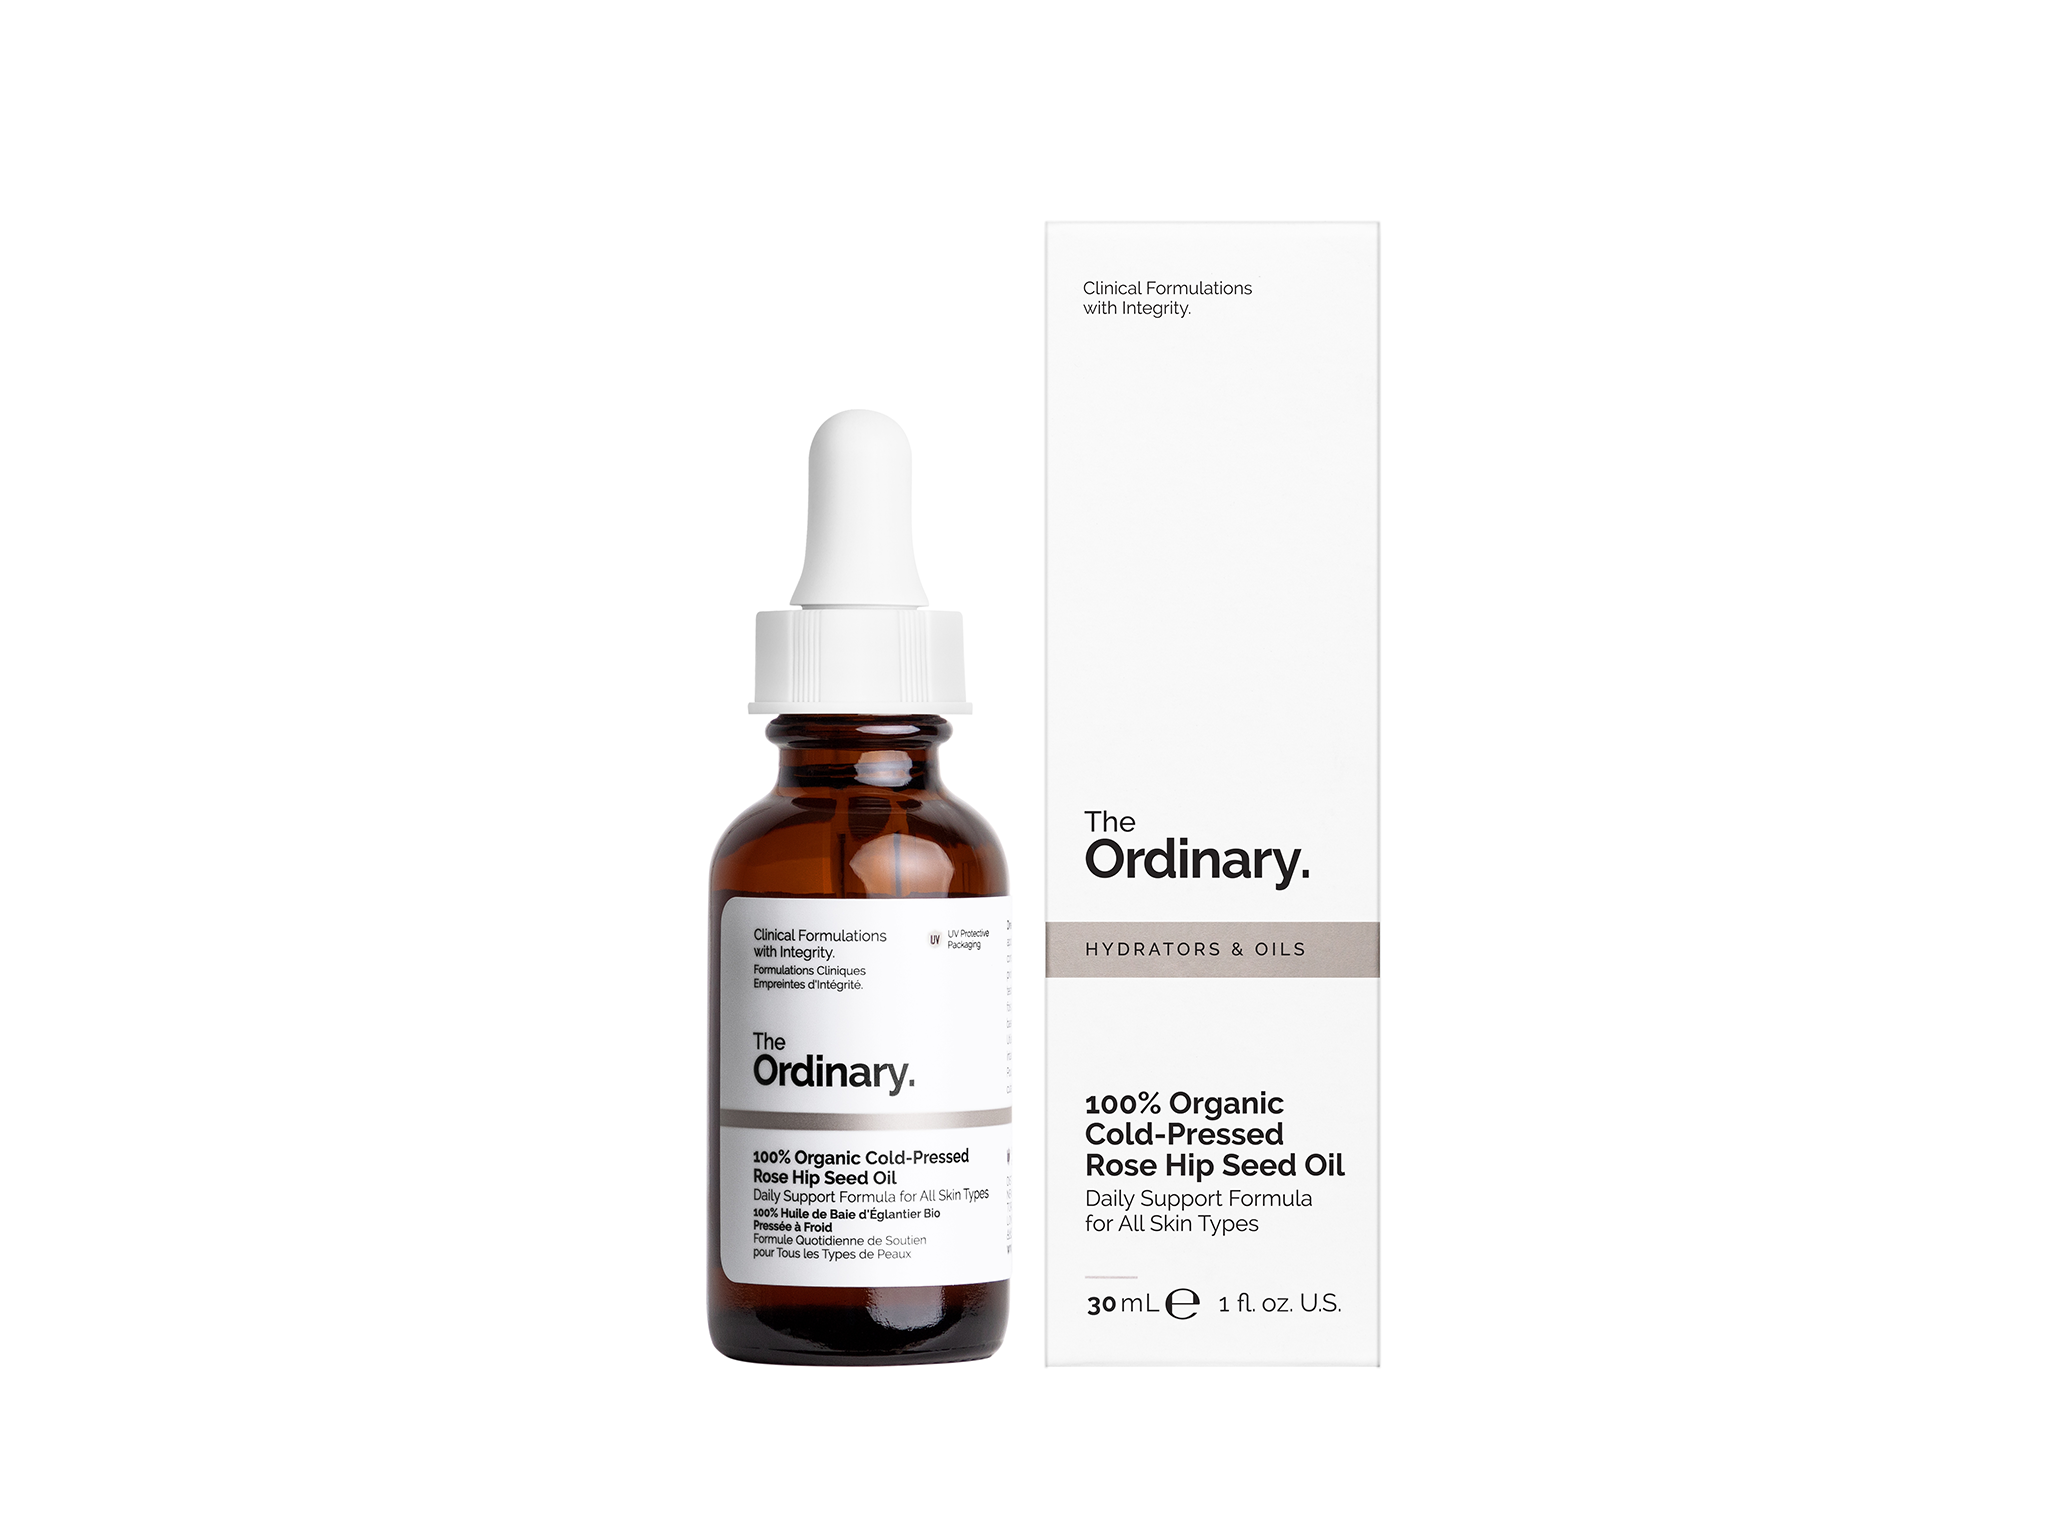 THE ORDINARY 100% ORGANIC COLD-PRESSED ROSE HIP SEED OIL, 30ML